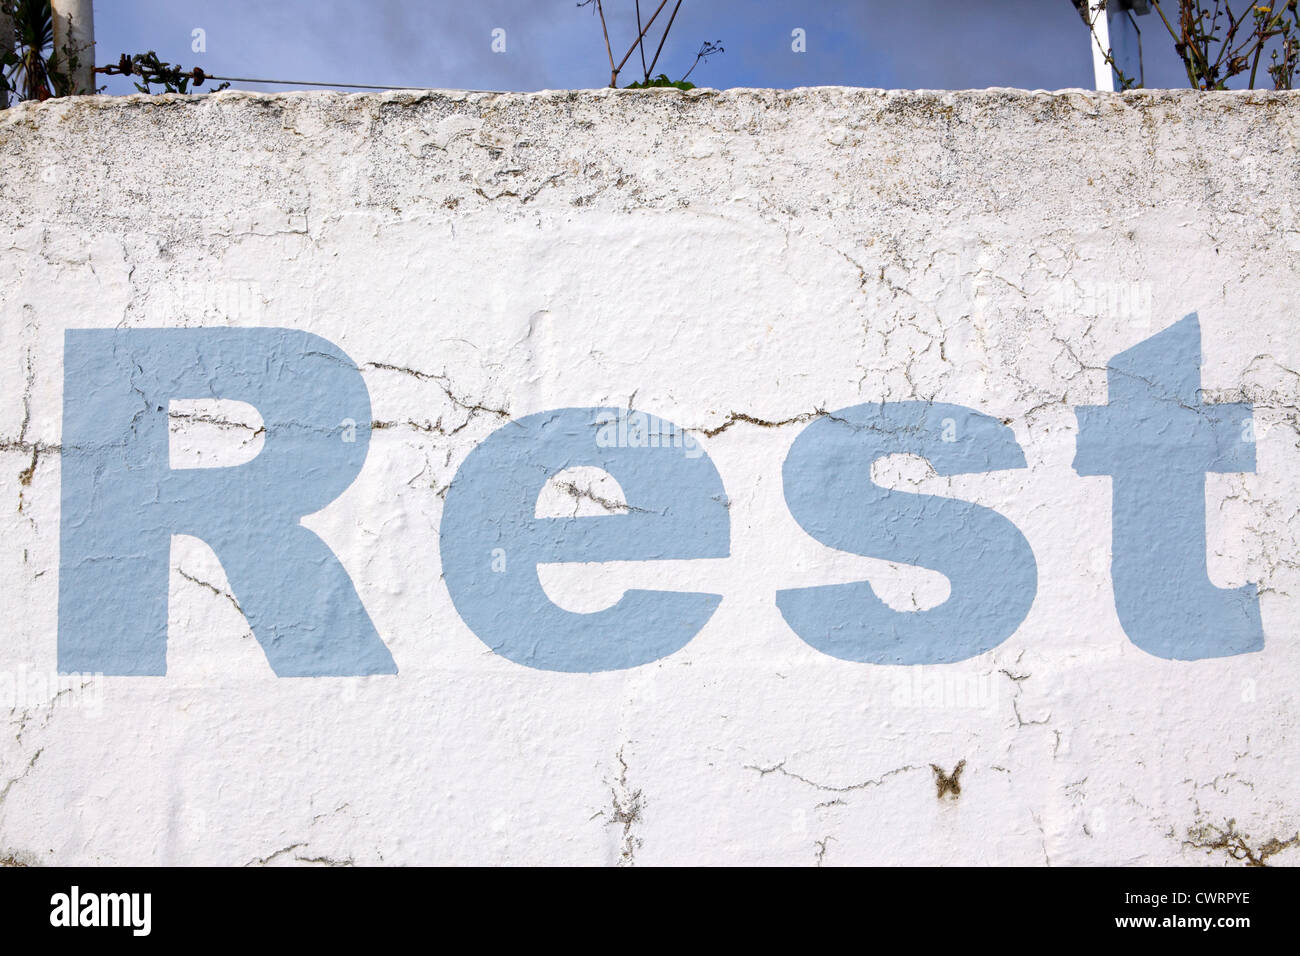 Lettering 'Rest', stencil style sky blue paint on a white washed wall background, crumbling and distressed look, Cornwall, UK Stock Photo